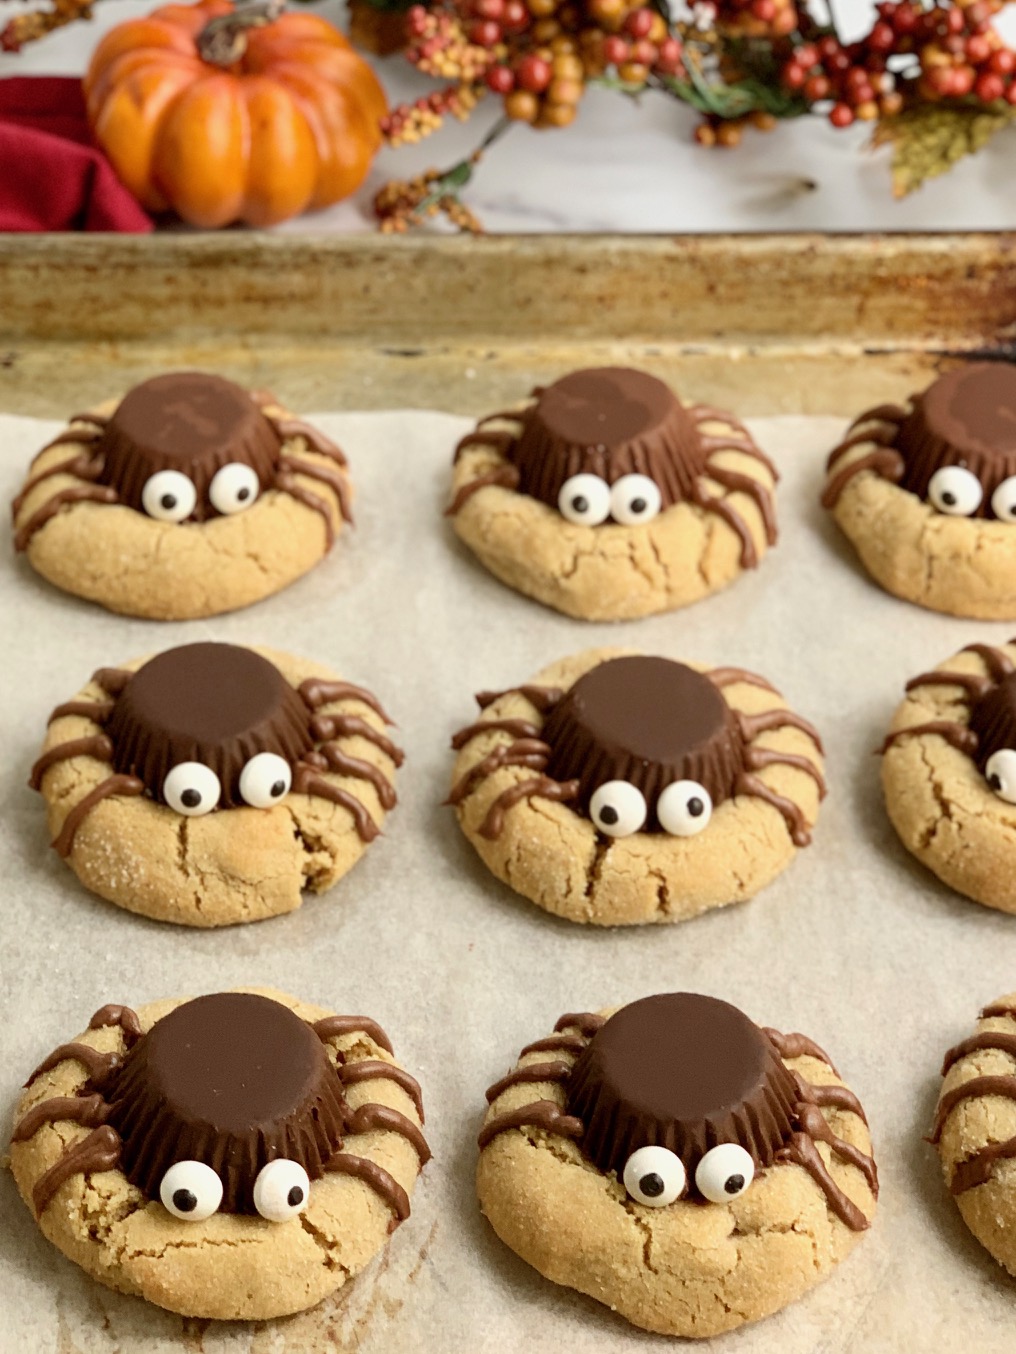 Peanut Butter Spider Cookies - Eating Gluten and Dairy Free